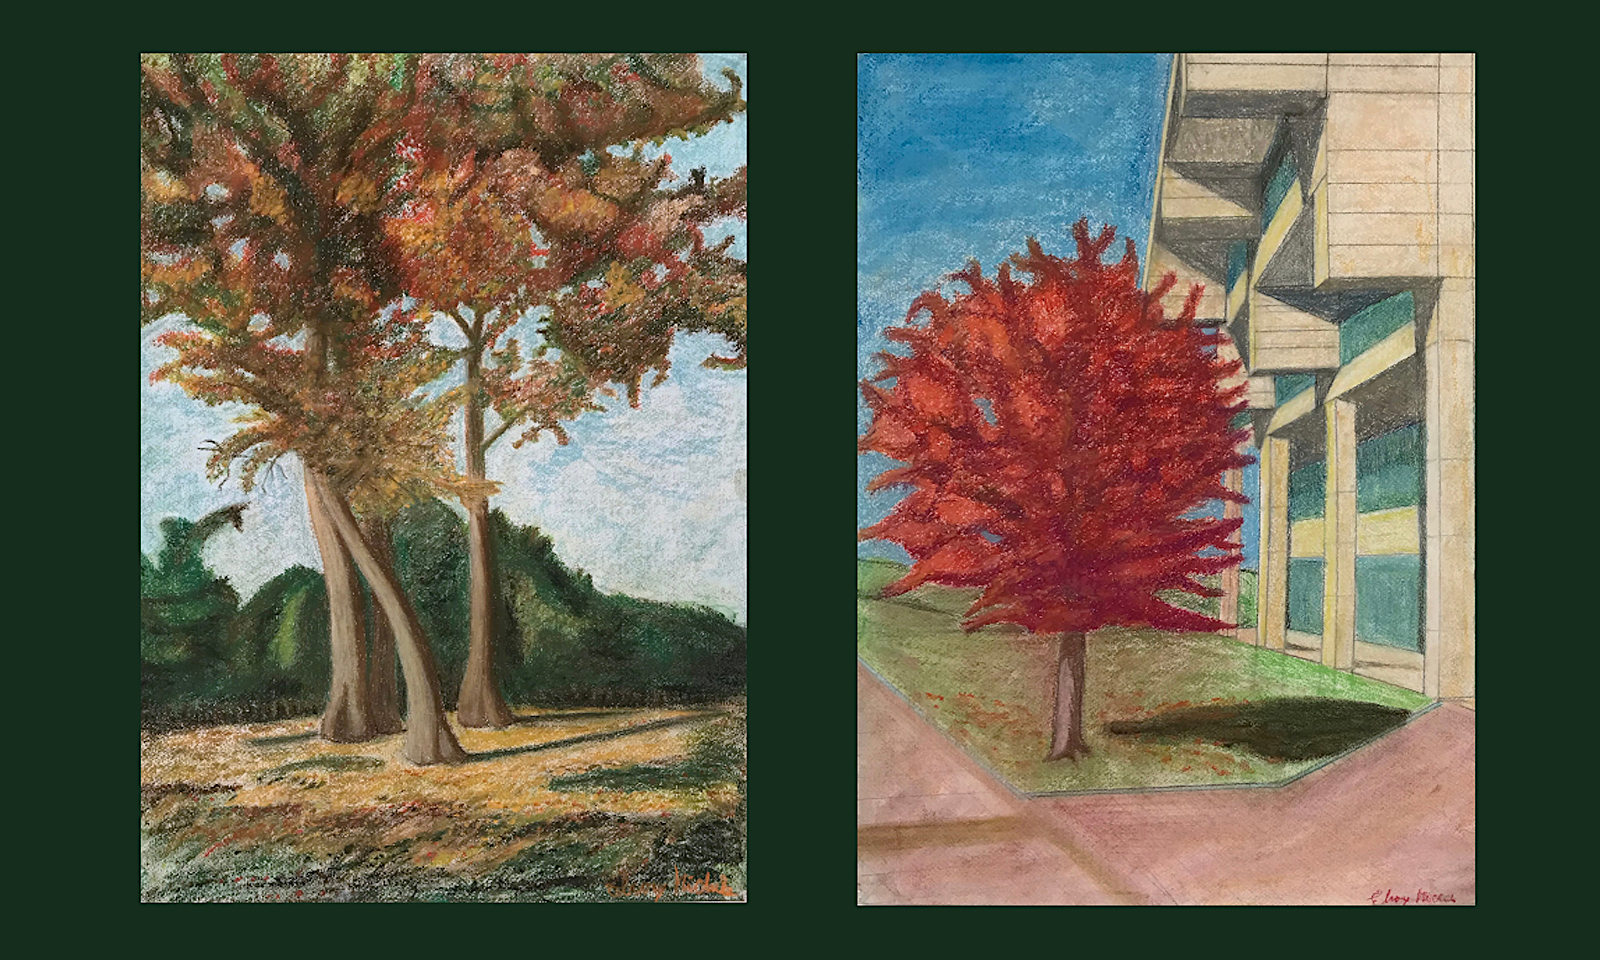 Drawings of trees on CSU campus